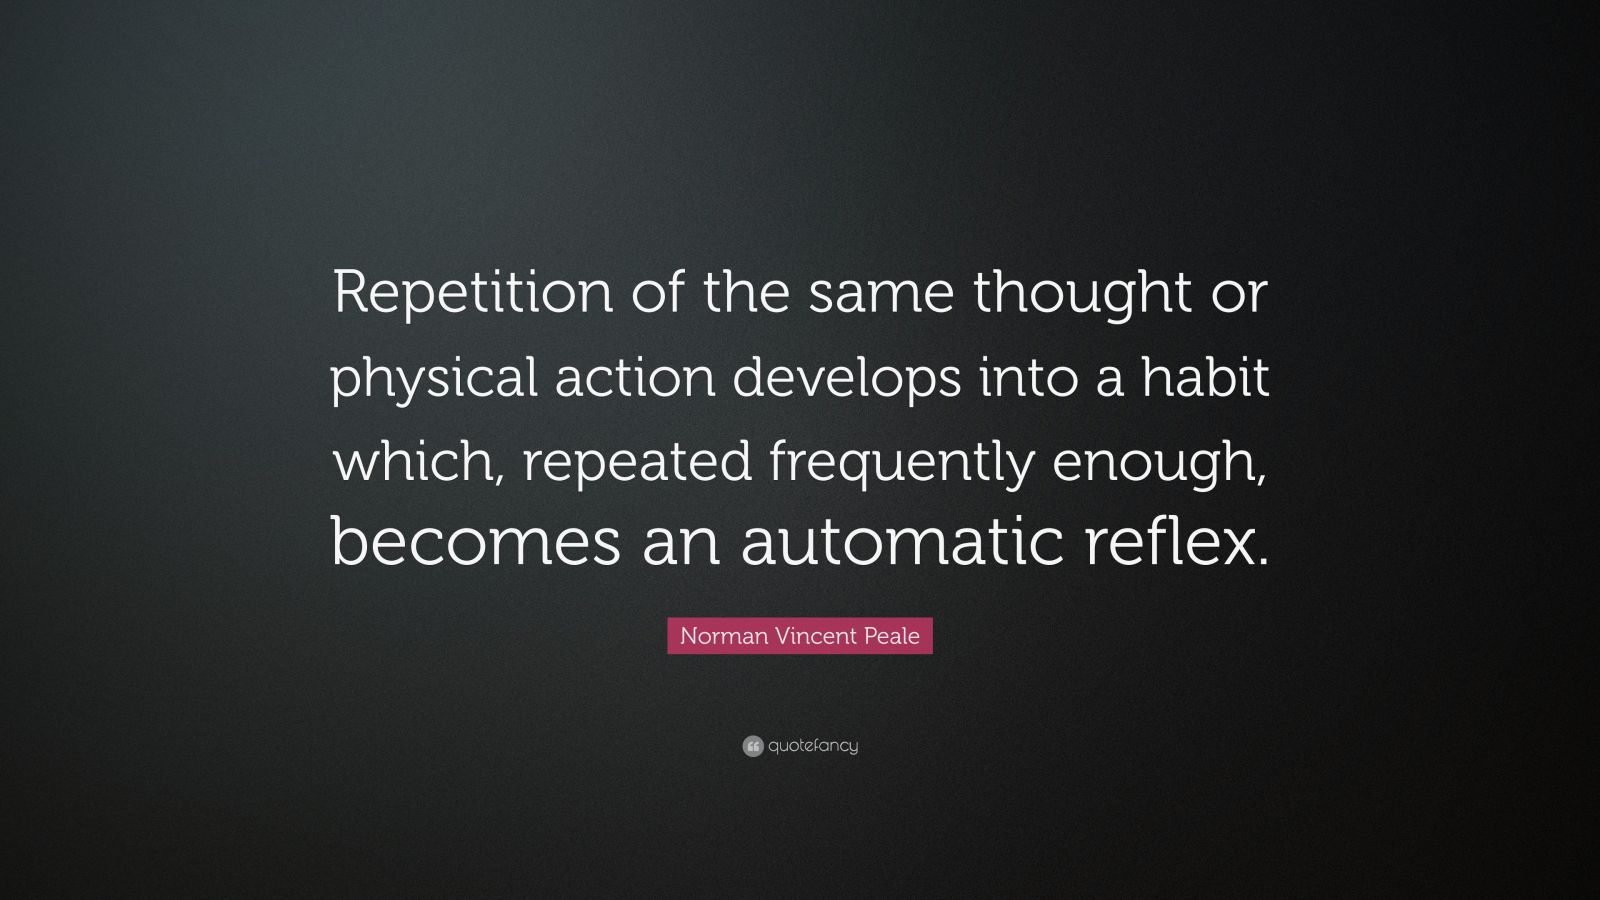 Norman Vincent Peale Quote: “Repetition of the same thought or physical